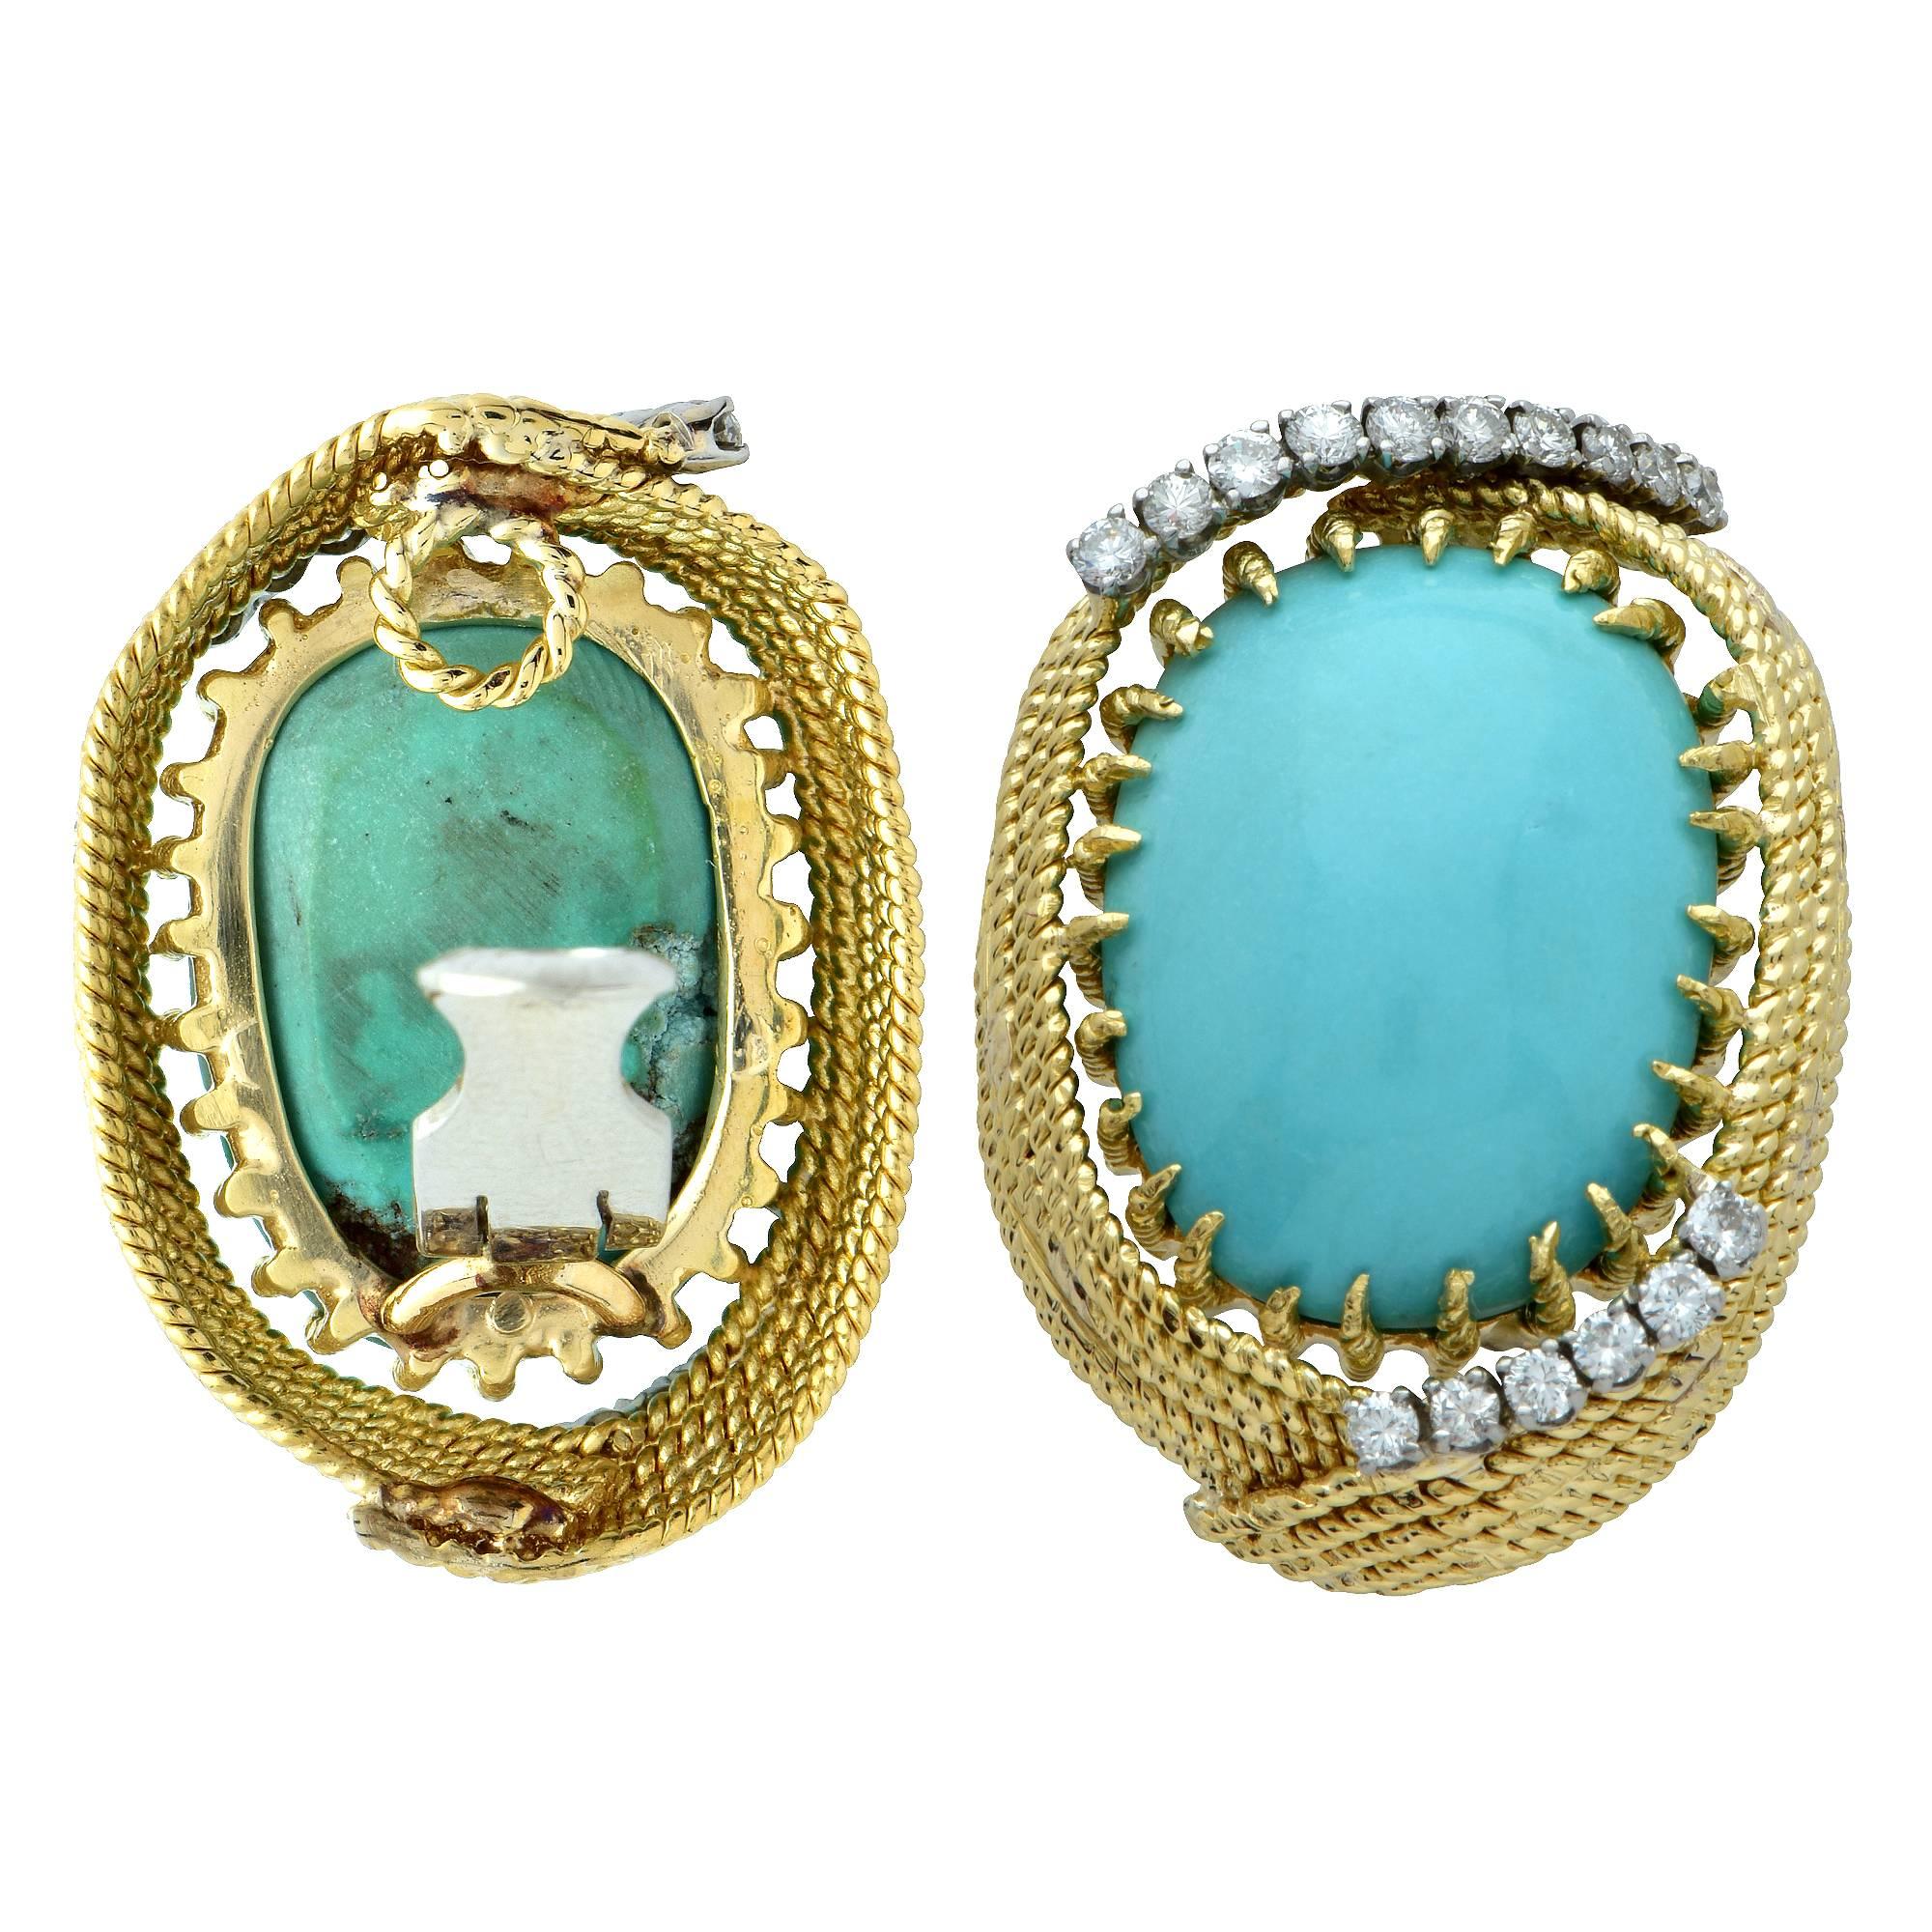 Turquoise cabochons set in 18k white gold accented by 32 round brilliant cut diamonds weighing approximately 1ct total G color VS clarity.

Measurements are available upon request.
It is stamped and/or tested as 18k gold.
The metal weight is 33.89